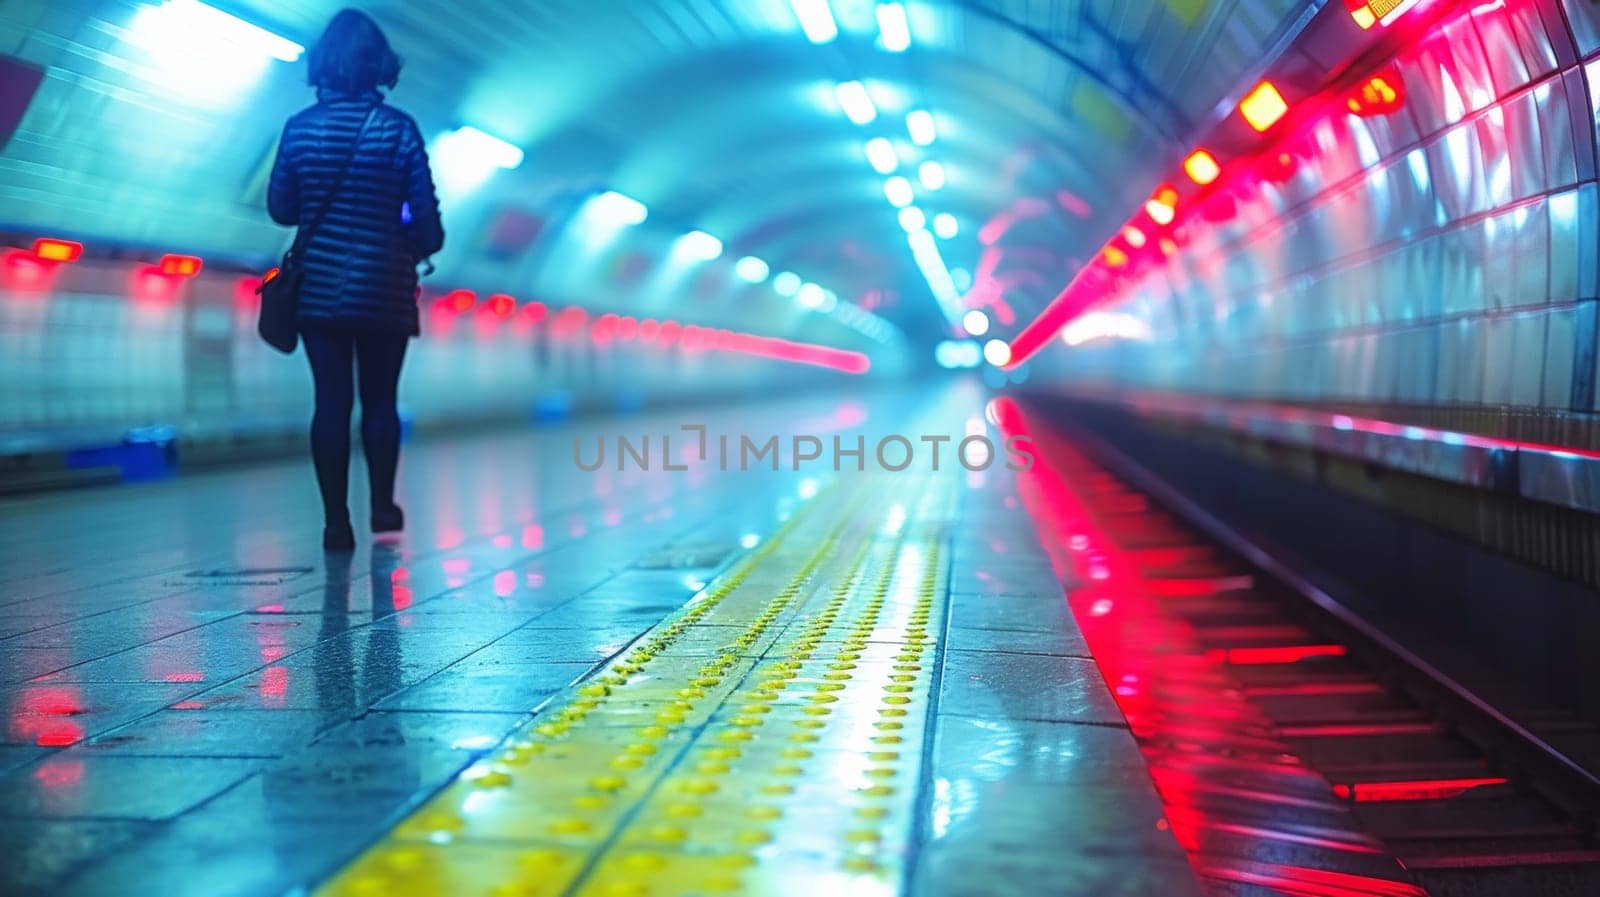 A woman walking down a subway tunnel with red and blue lights